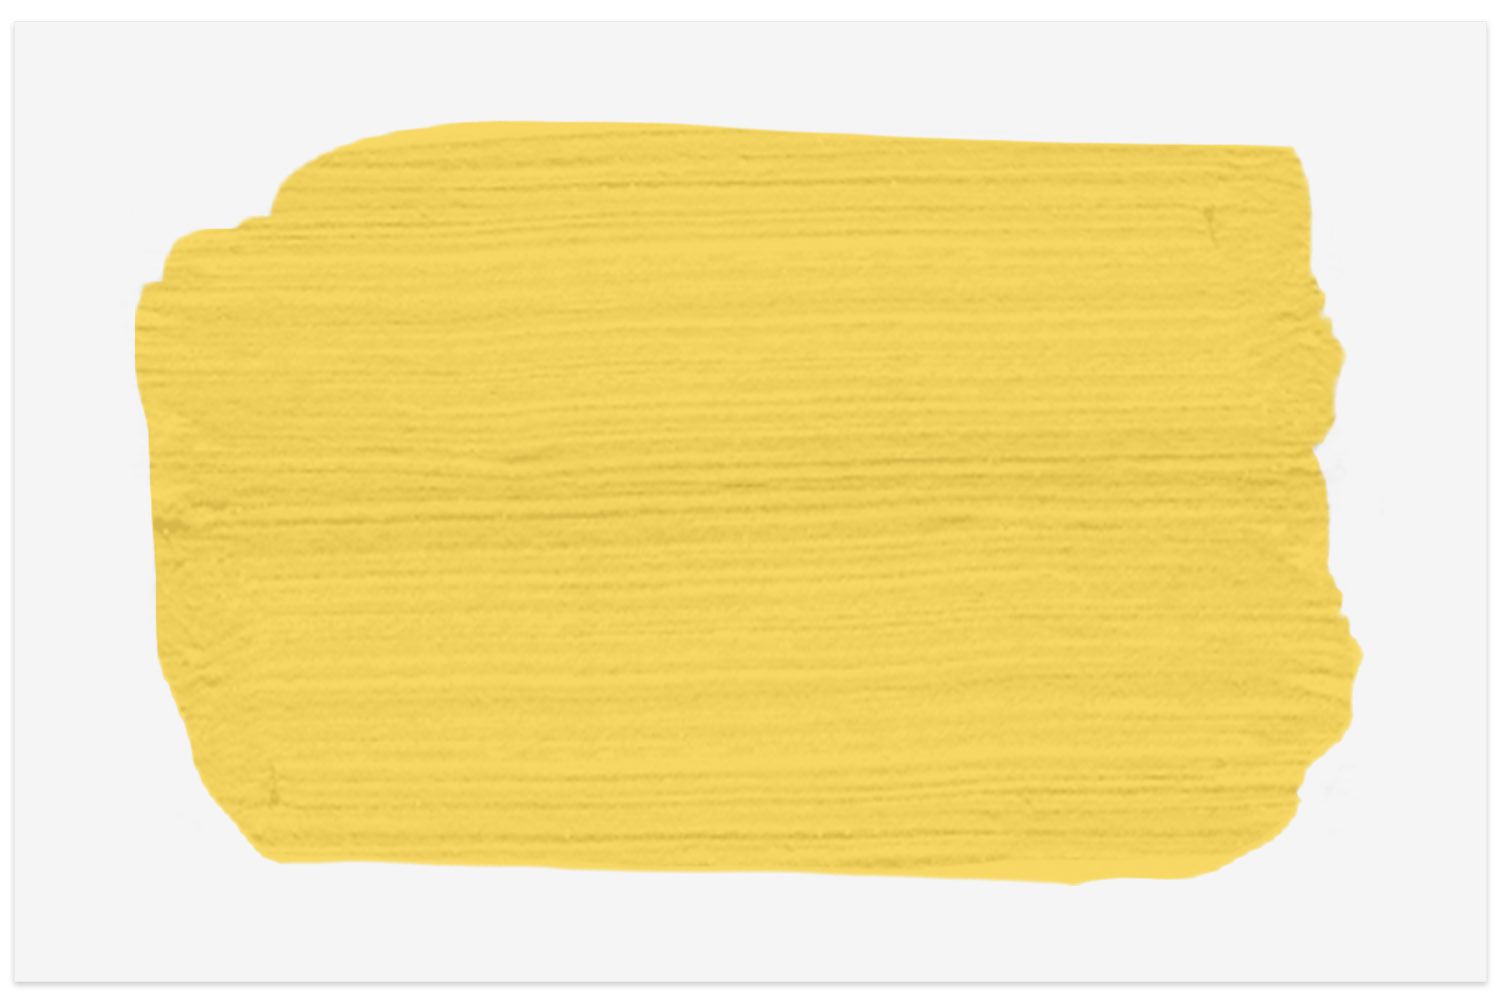 Forsythia Blossom paint swatch from PPG Paints